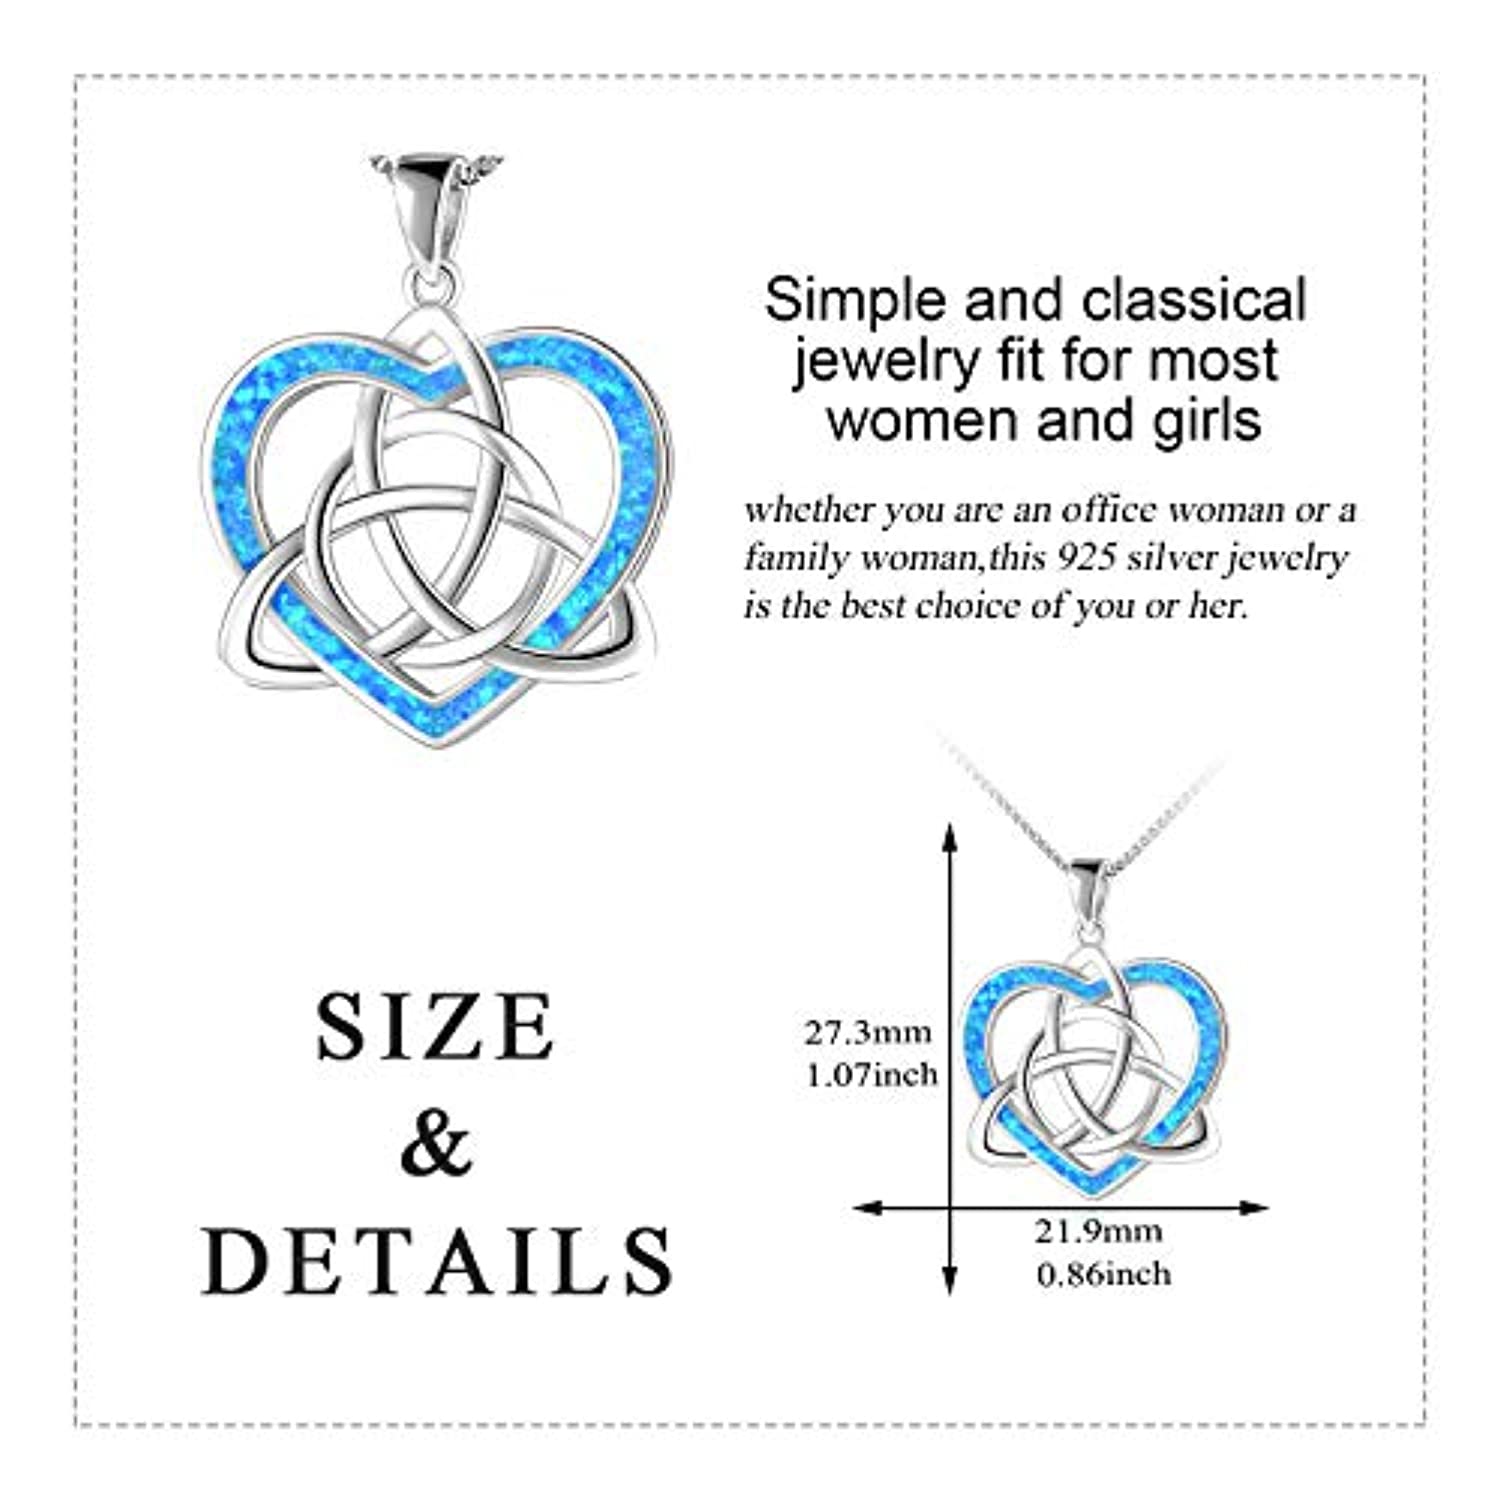 Celtic Love Knot Necklace Jewelry Sterling Silver Good Luck Vintage Triquetra Irish Celtic Love Heart Pendant Necklace for Women Girls